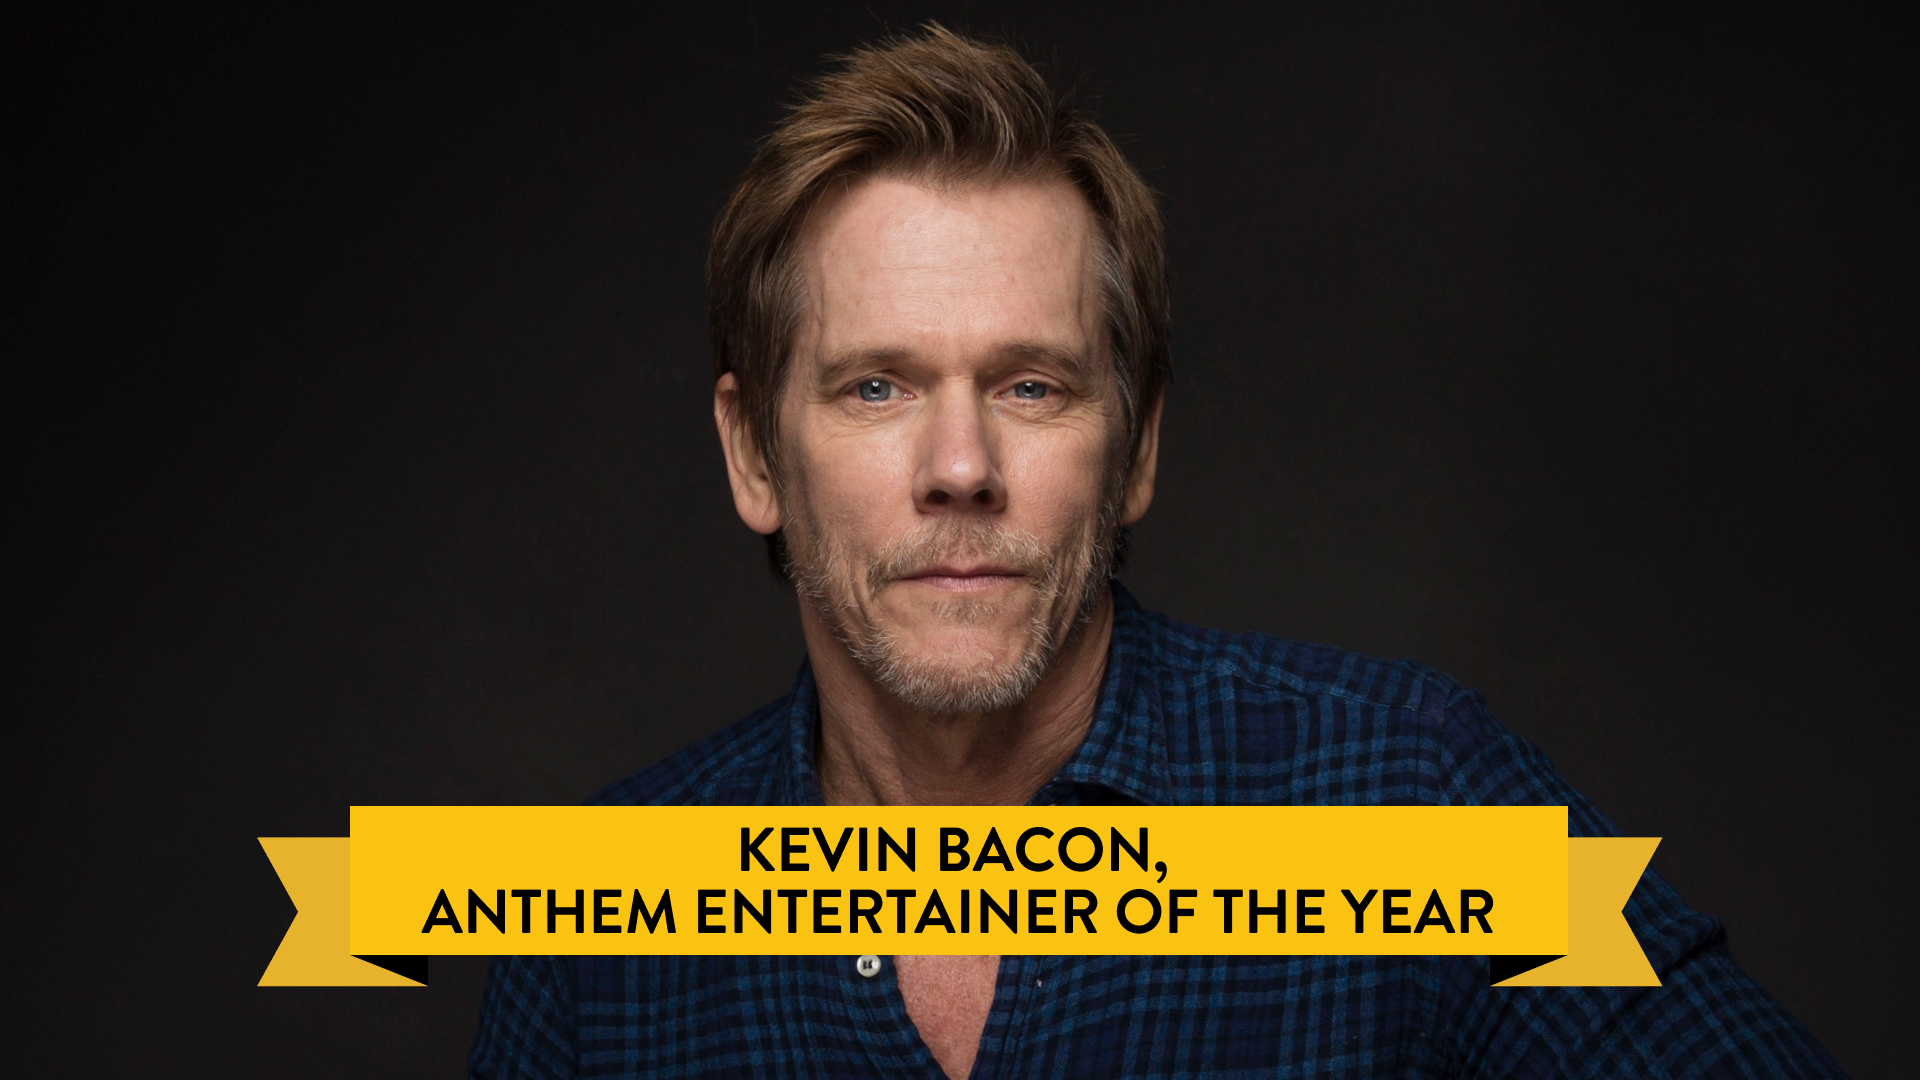 Image: a headshot of actor kevin bacon against black background. text reads: kevin bacon, anthem entertainer of the year